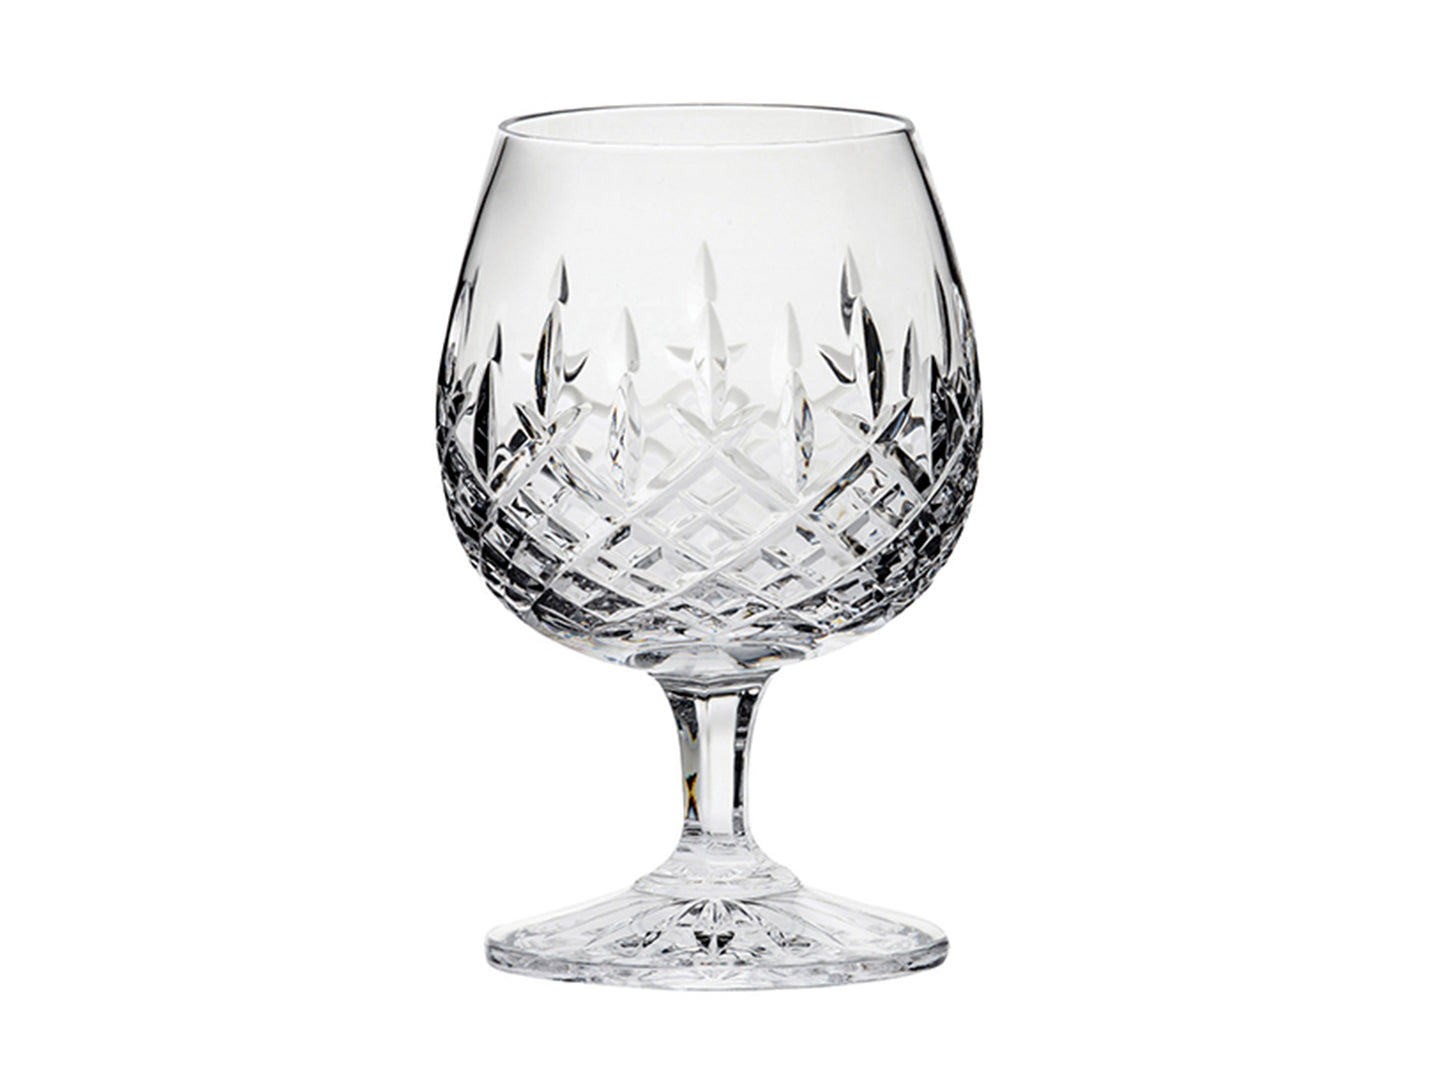 A single Royal Scot Crystal London Brandy Glass, which has a rounded bowl and short stem, decorated with a diamond bed and single points above it